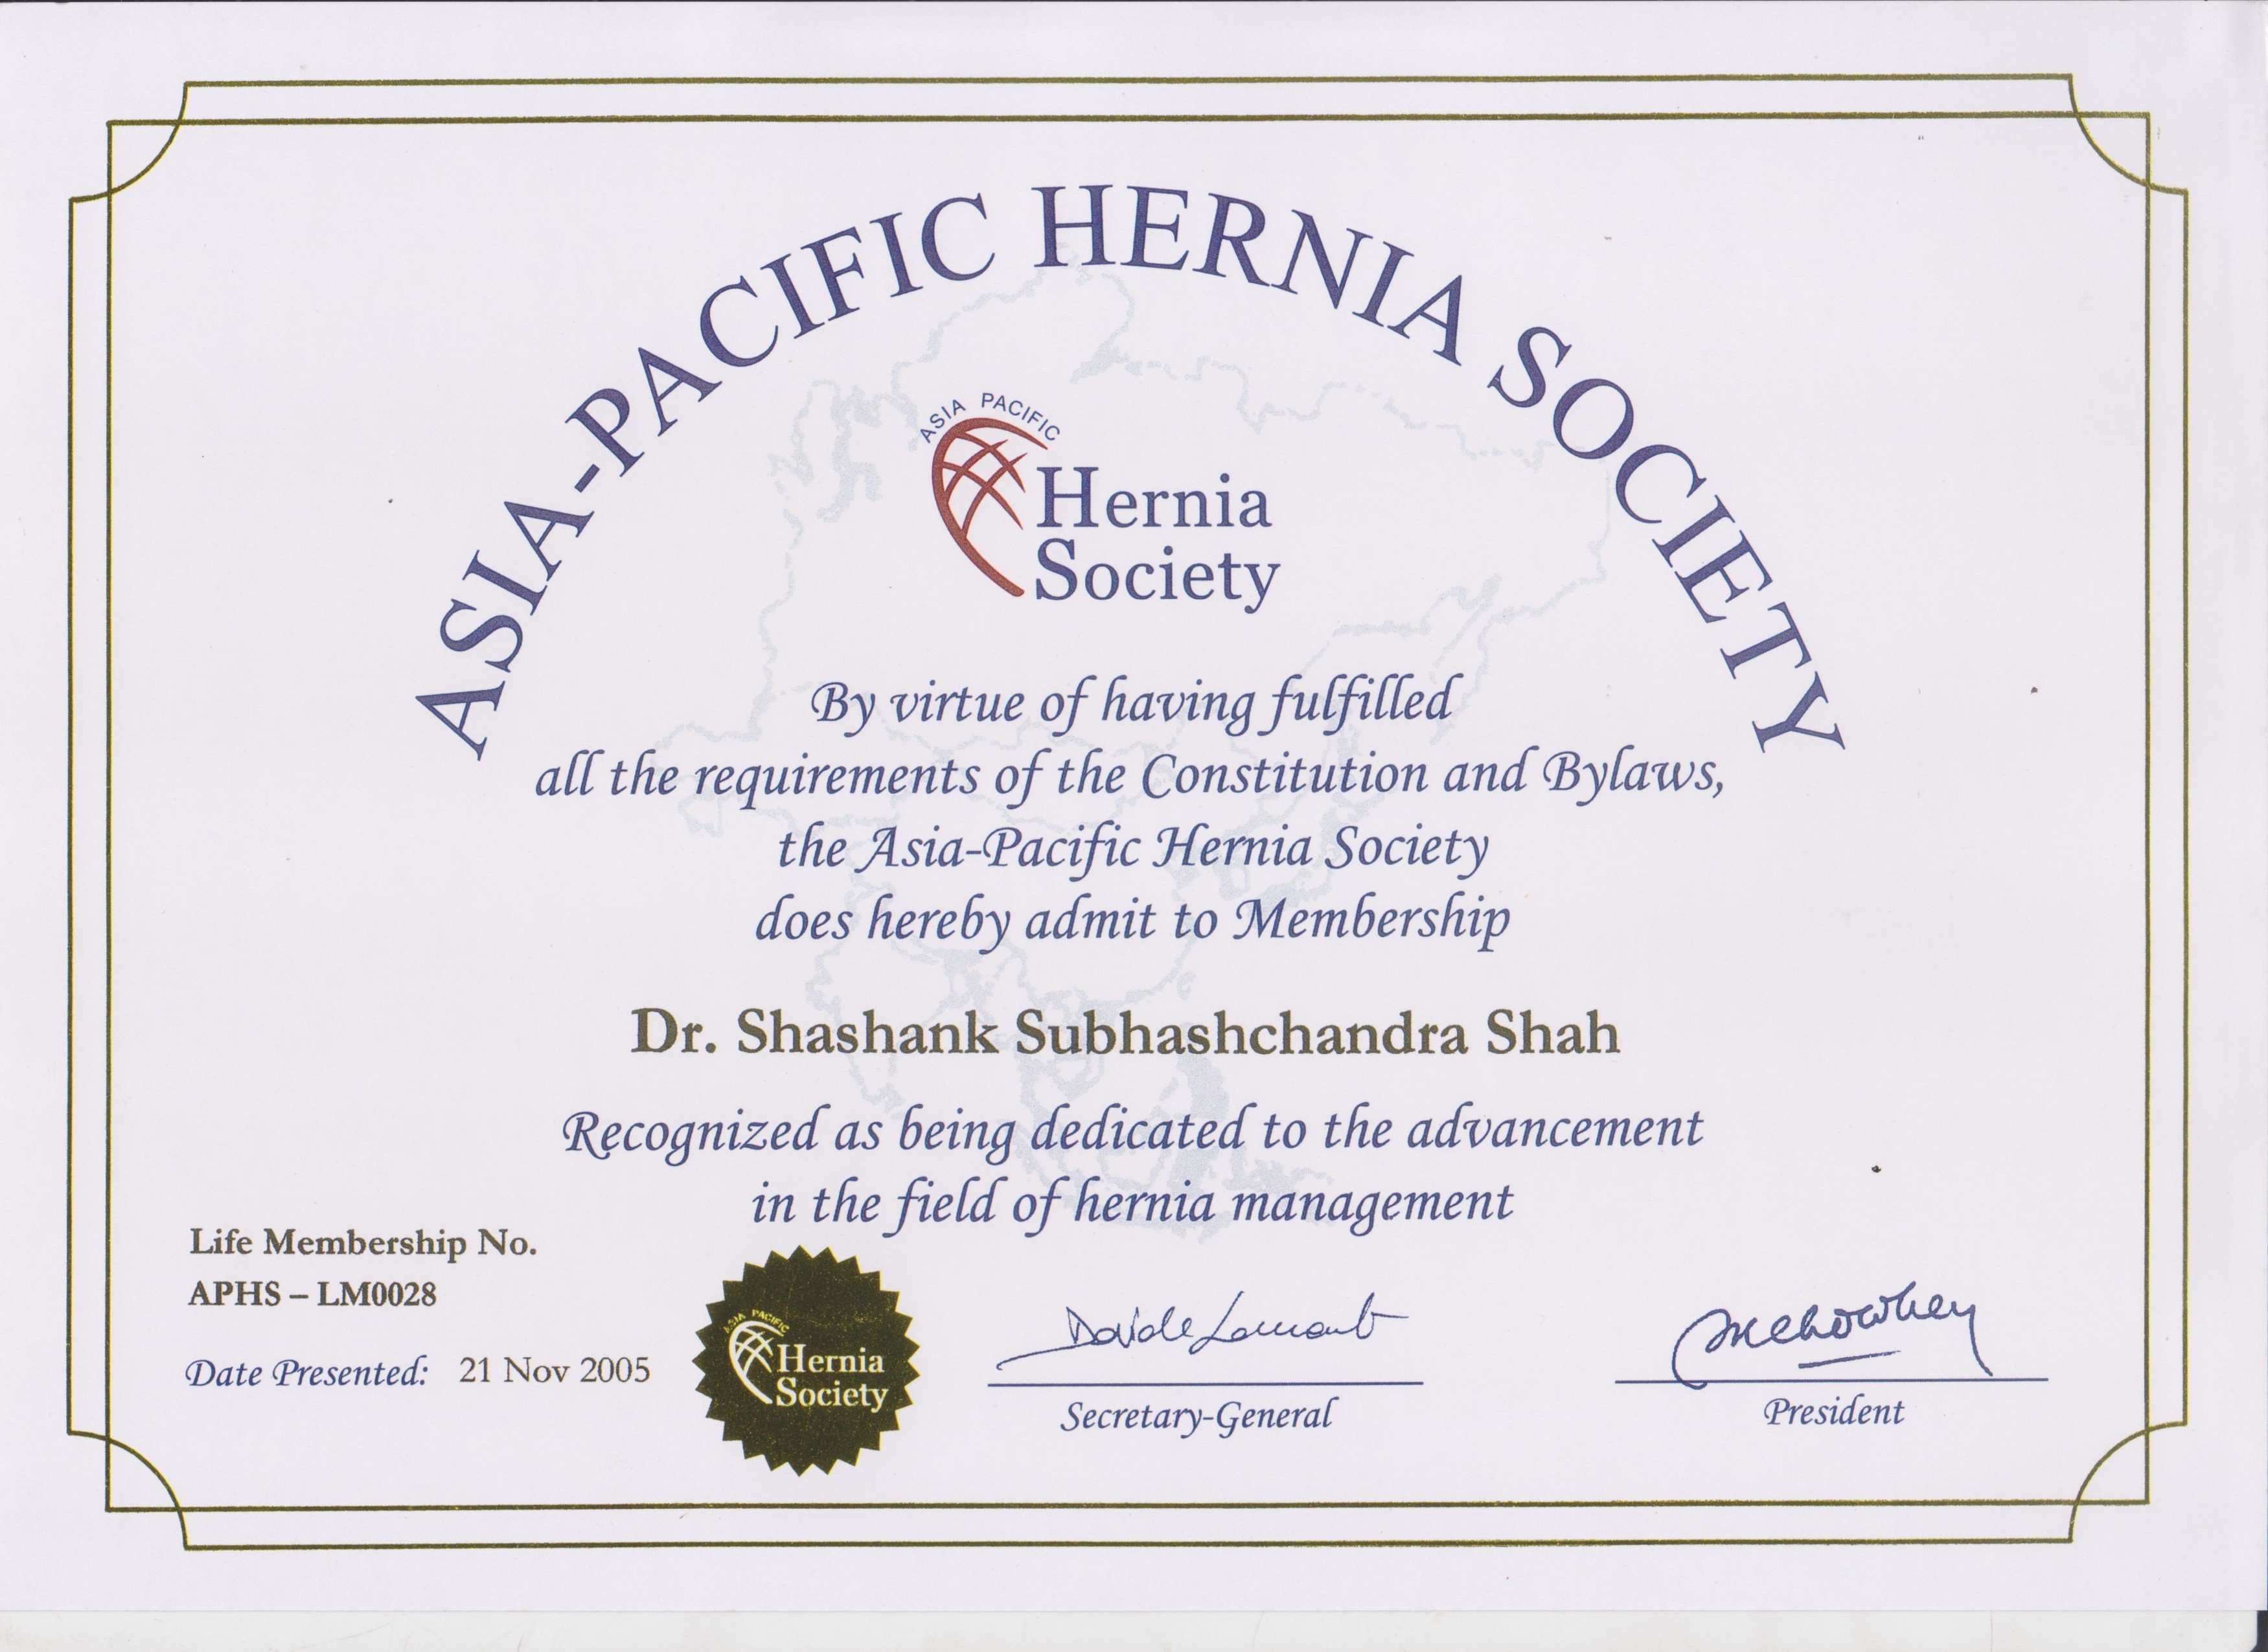 Dr Shashank Shah is the Life Member of the Asia Pacific Hernia Society since 2005.